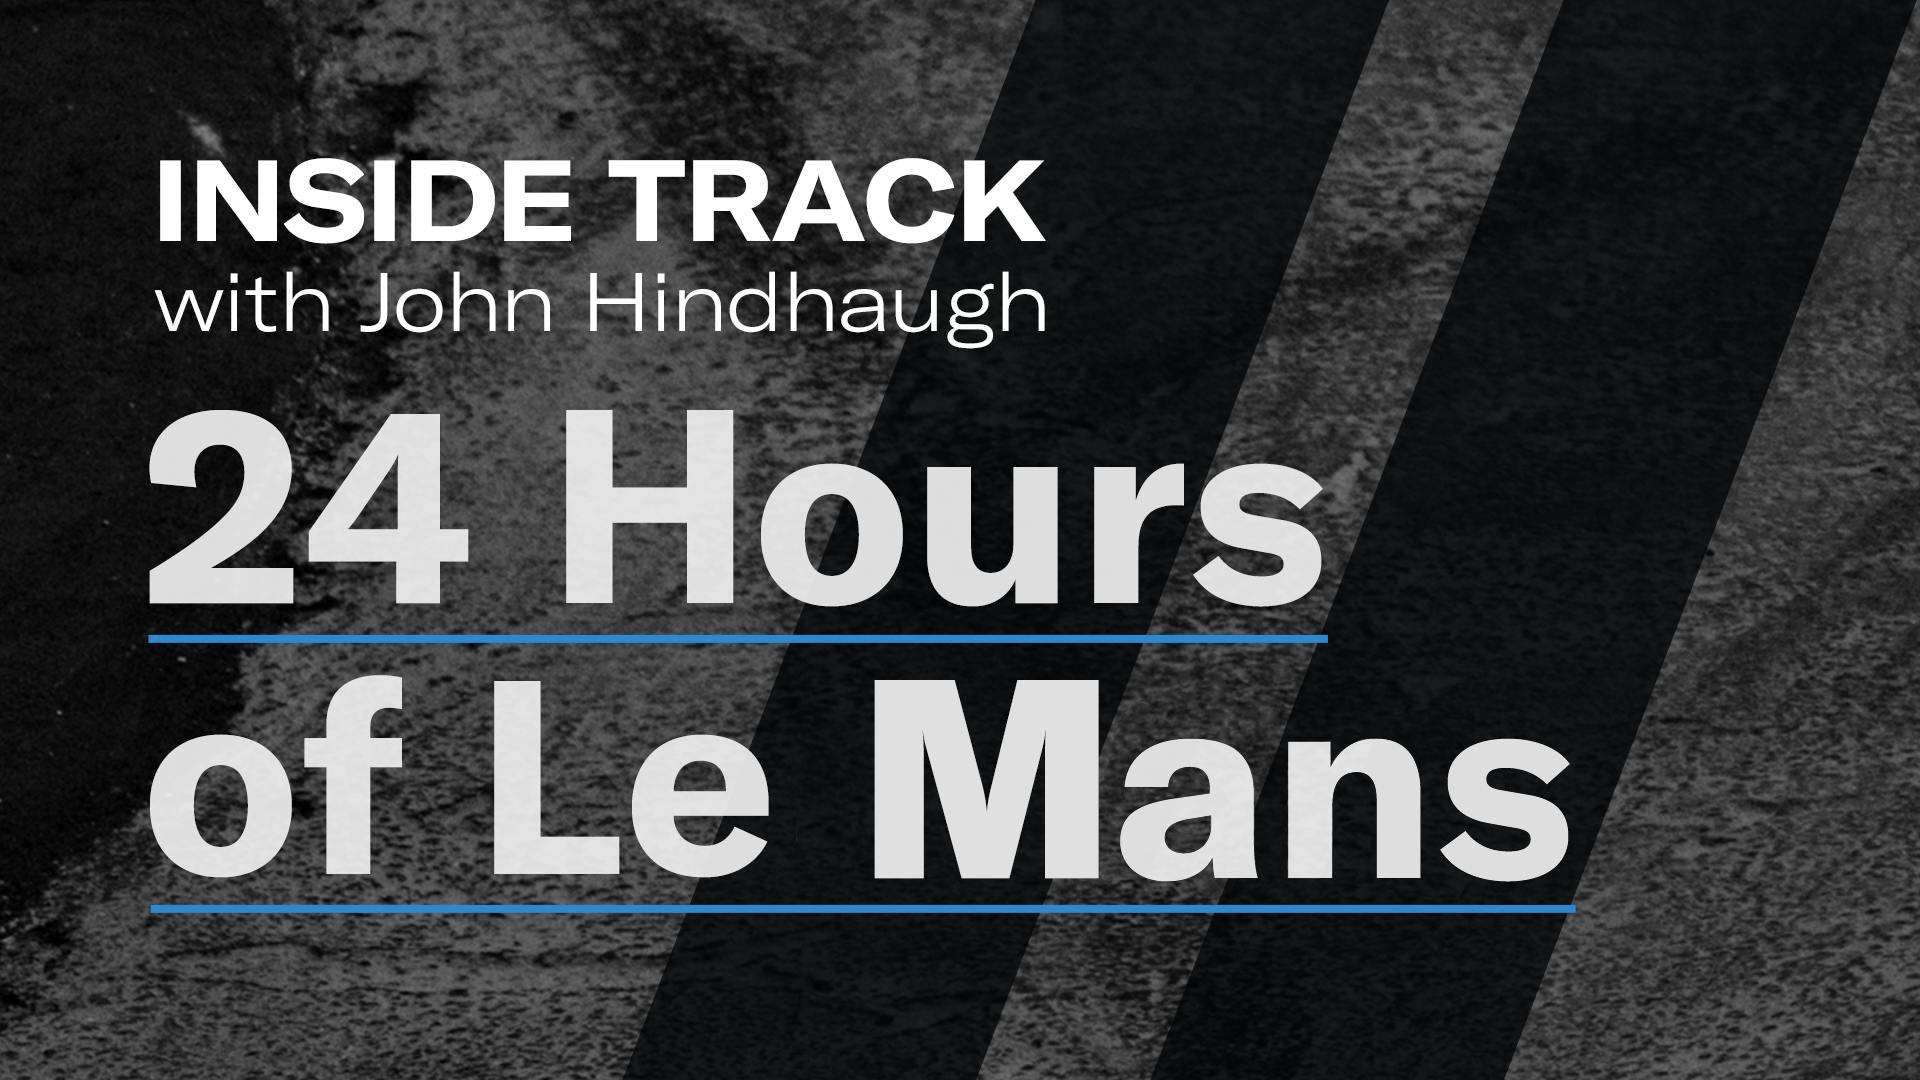 24 Hours of Le Mans | Inside Track with John Hindhaugh